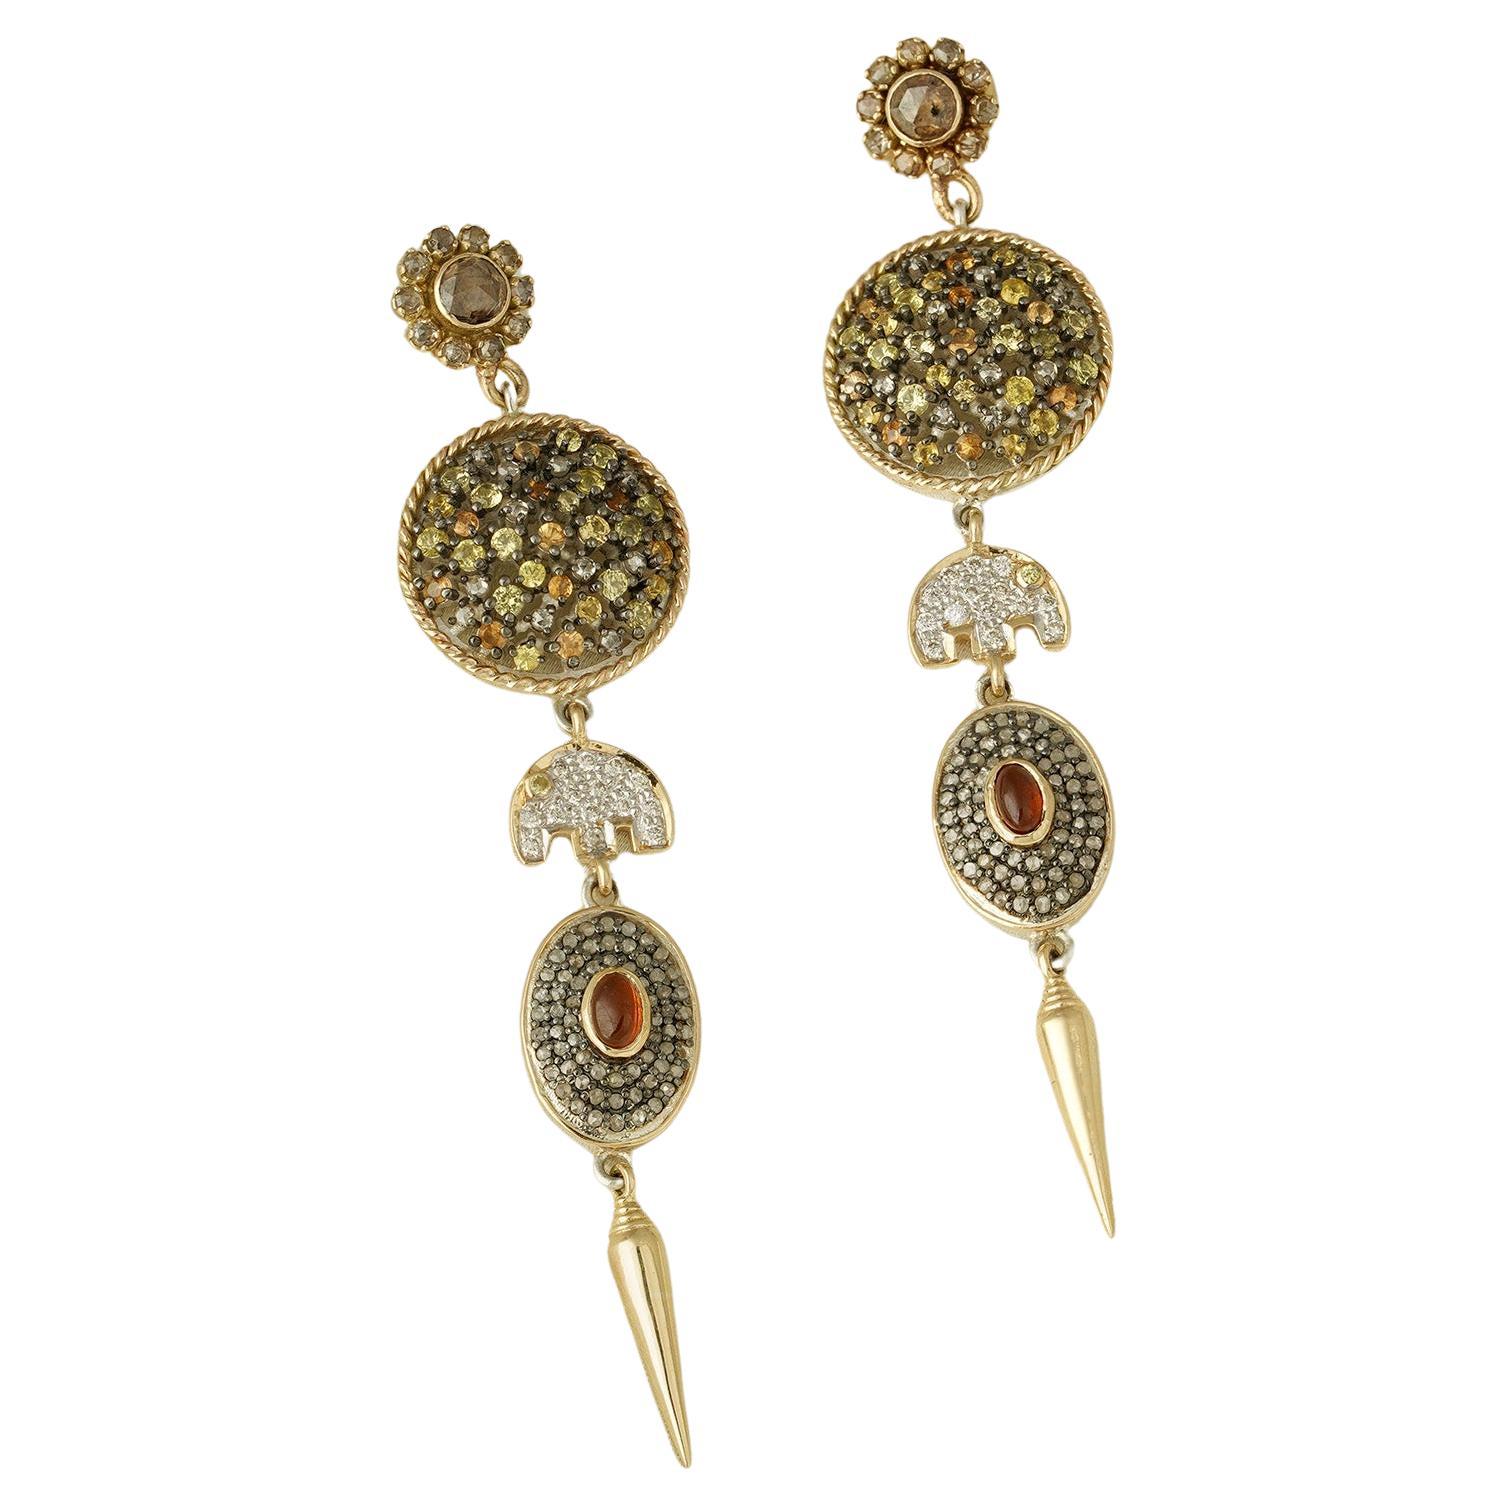 Gold(14K) : 9.56g
Diamonds : (VS clarity & H-I colour): (Brilliant cut) : 0.28ct
Rose-cut Diamond : 2.88ct
Gemstone : Yellow Sapphire, White Sapphire and Hessonite
925 Silver

The Zora earrings are an elegant concoction of elegant yellow and white